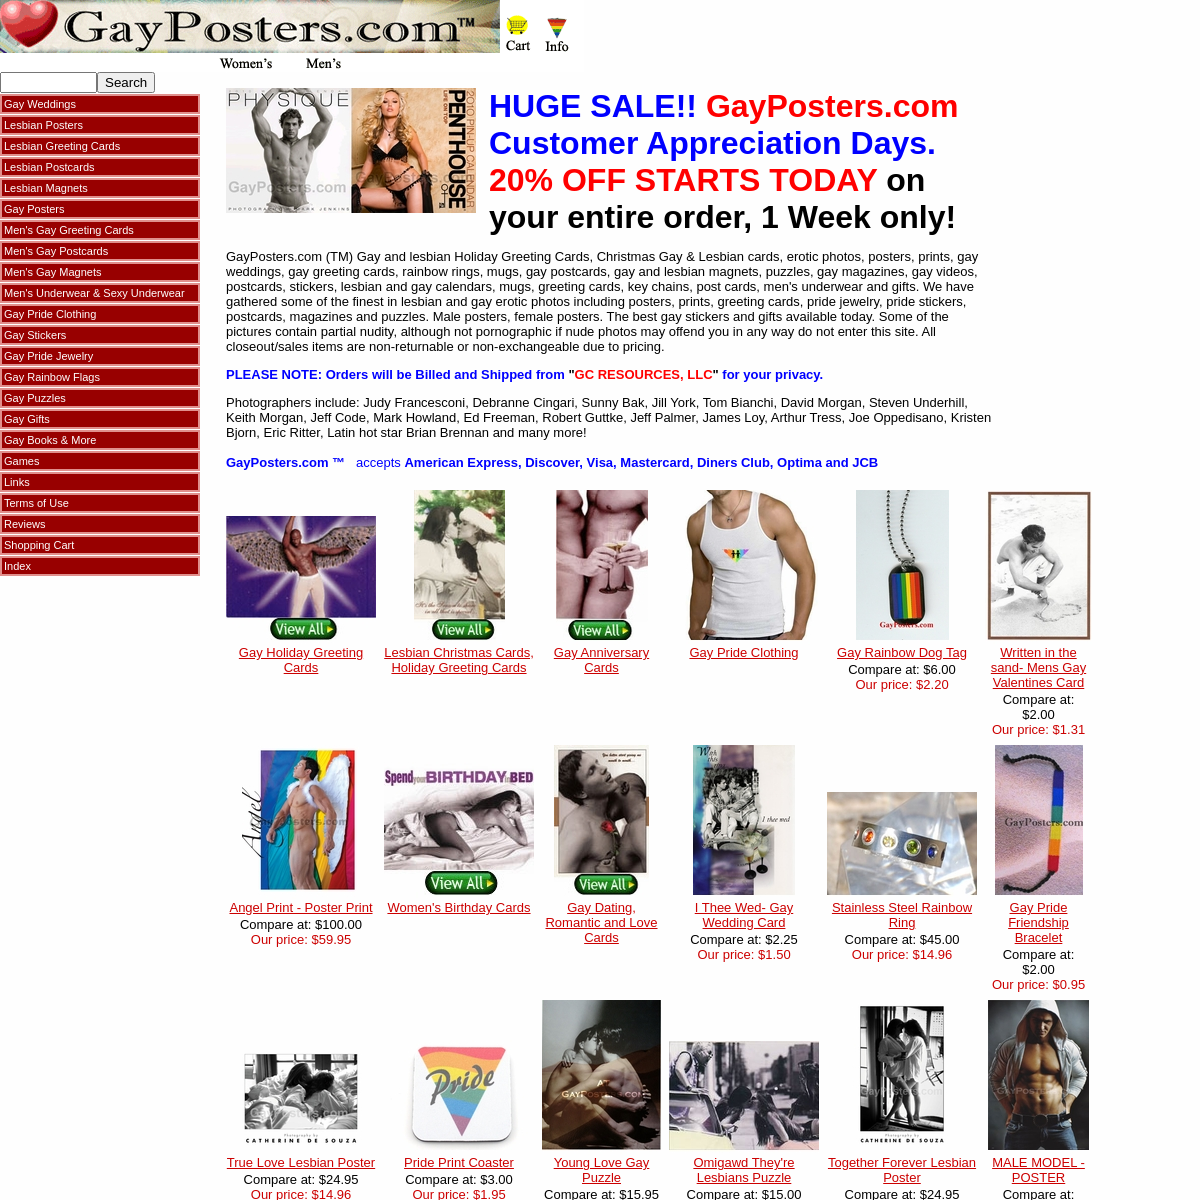 A complete backup of www.gayposters.com